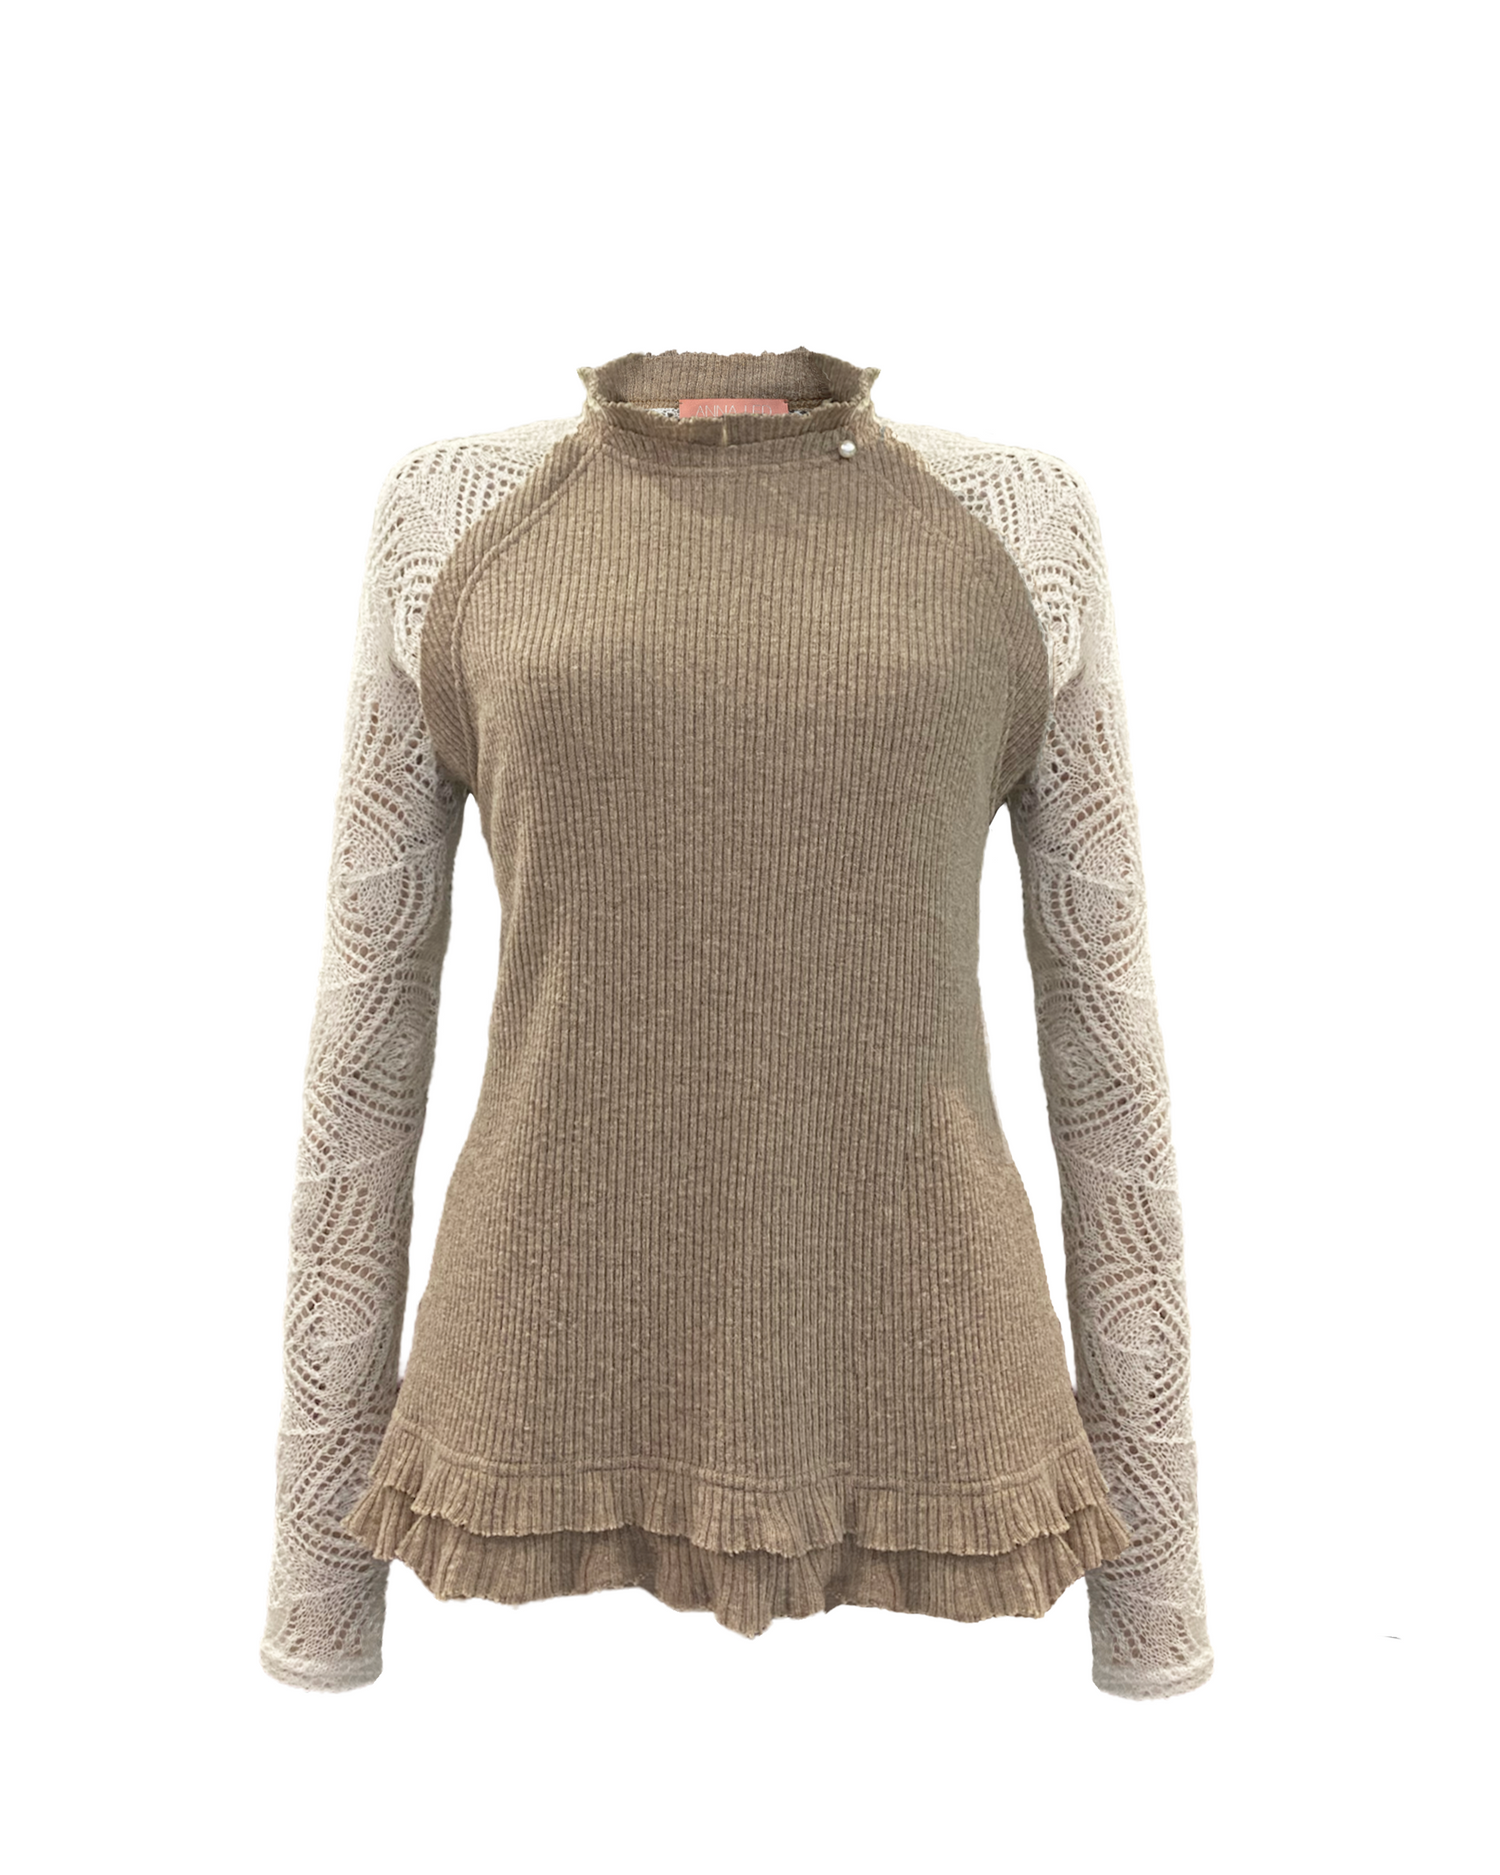 BEIGE TOP WITH WHITE DECORATIVE LONG SLEEVES AW23/24